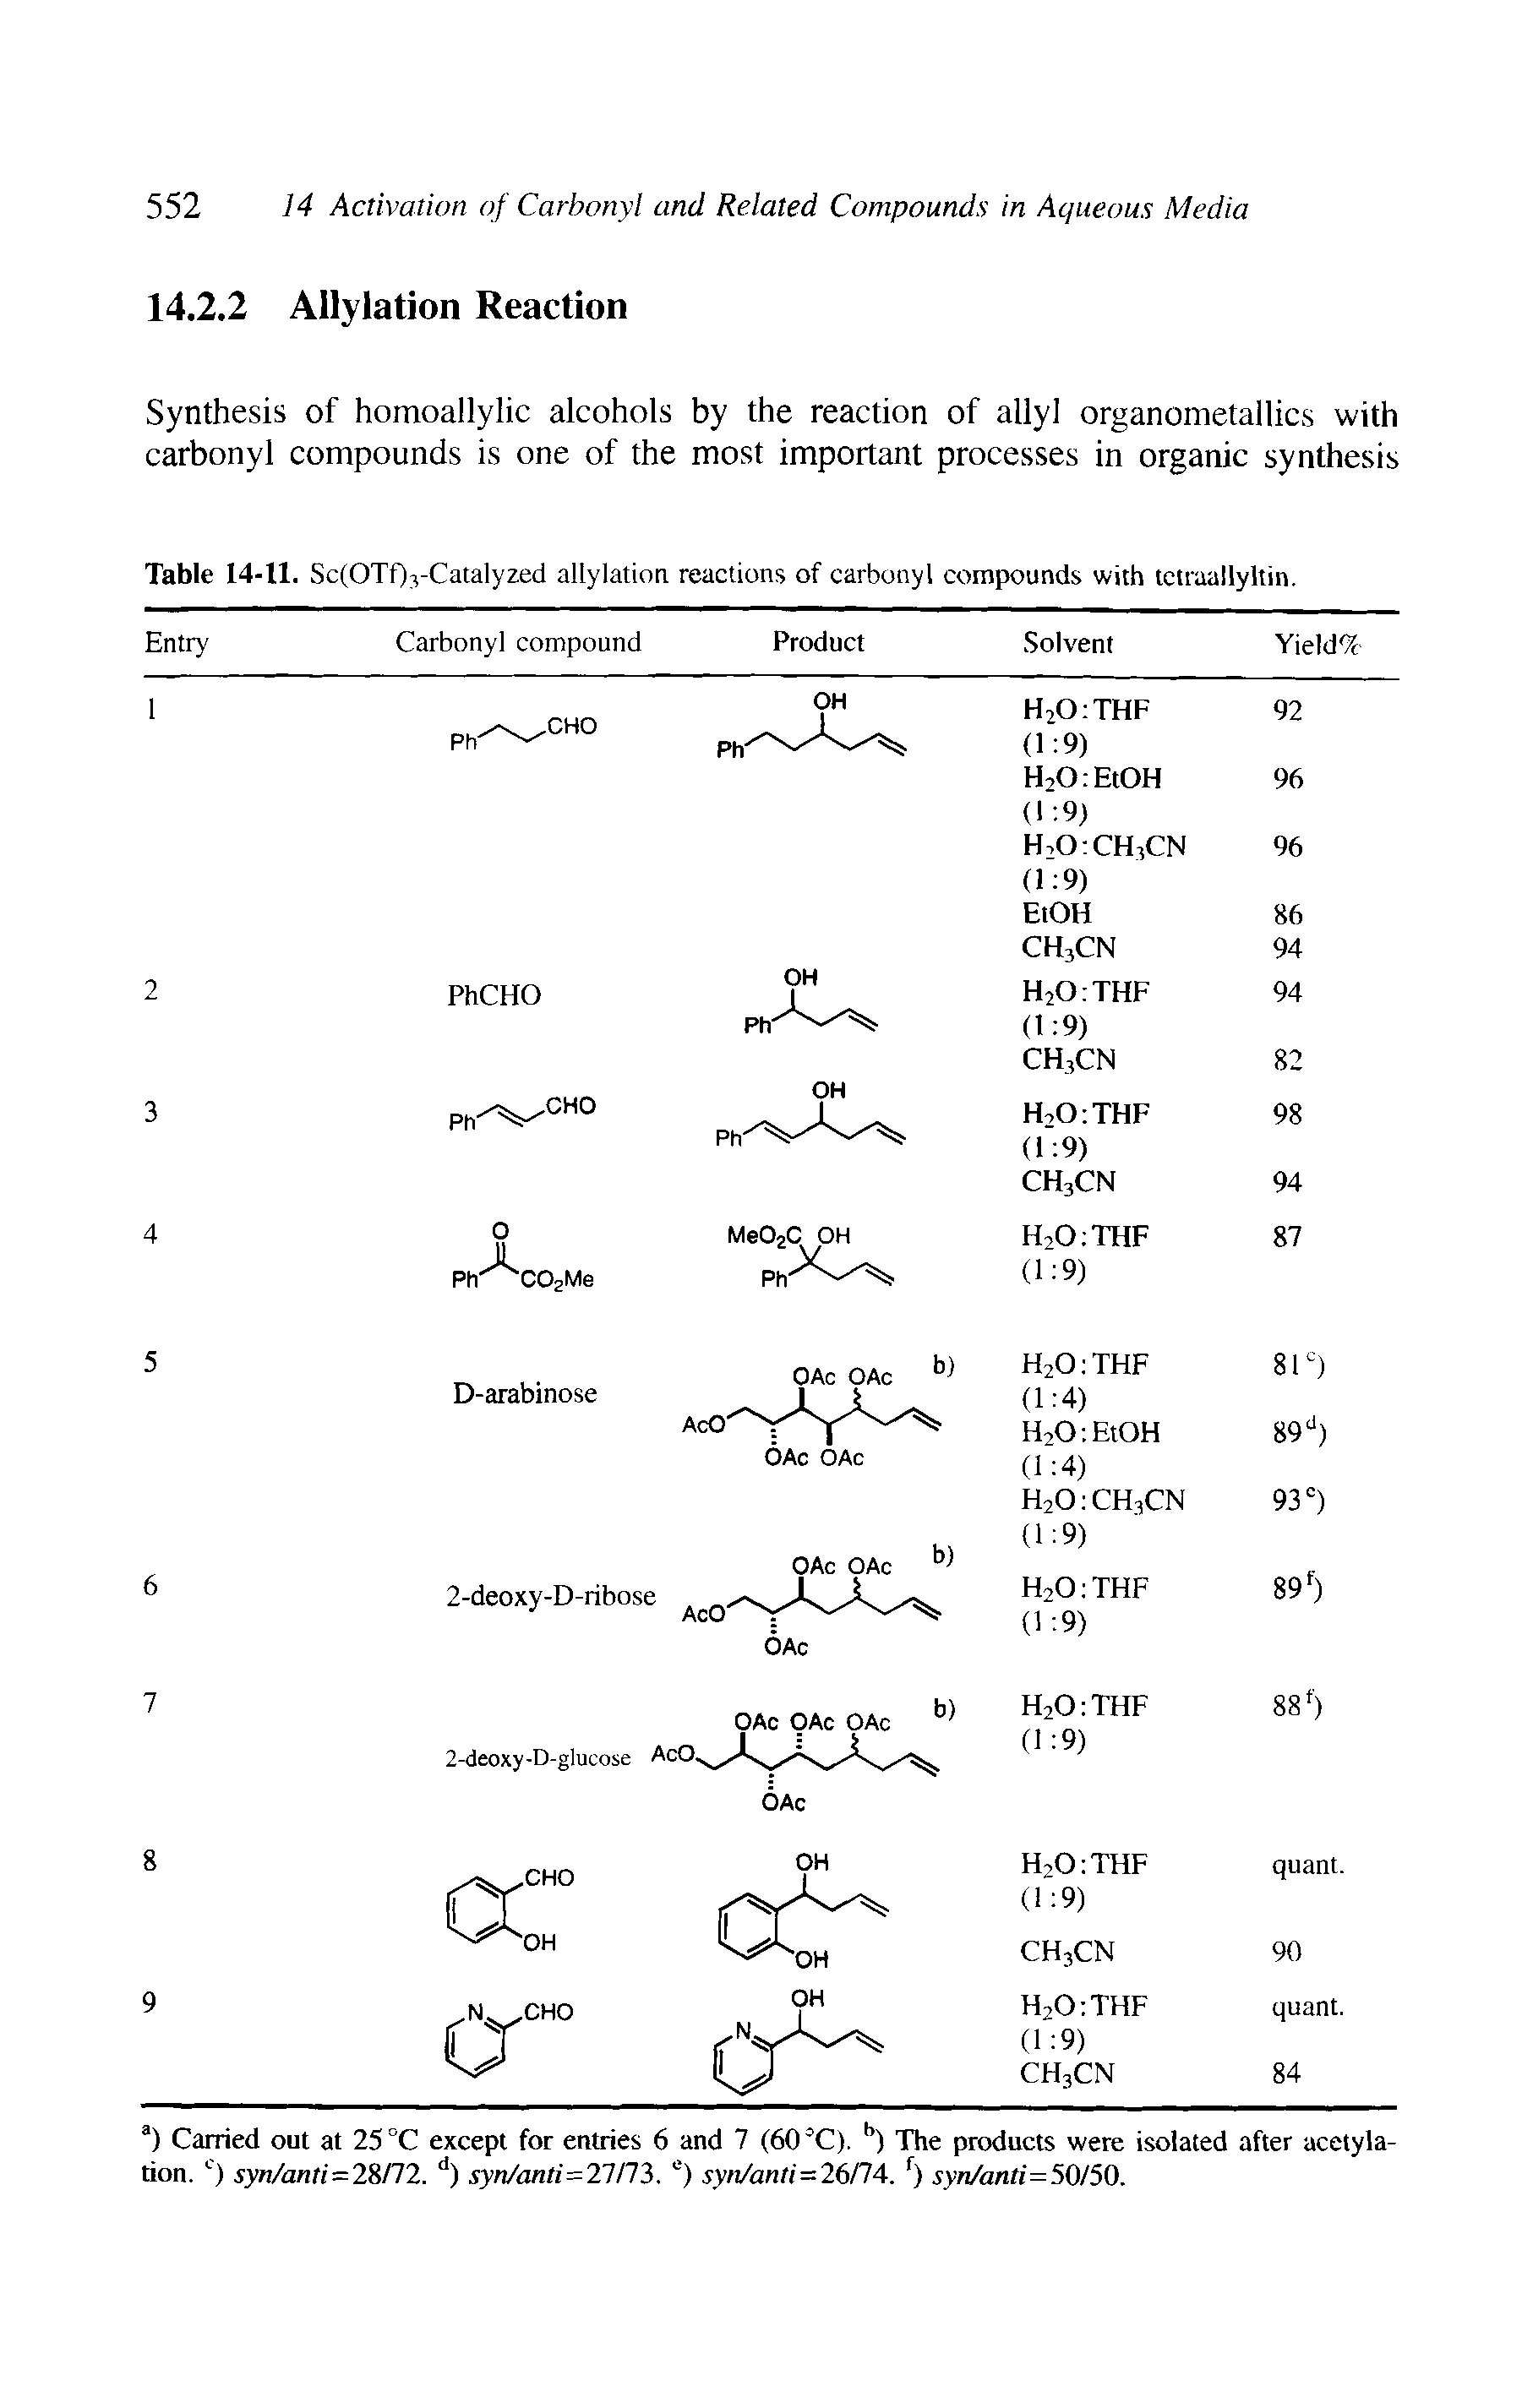 Table 14-11. Sc(OTf)3-Catalyzed allylation reactions of carbonyl compounds with tctraallyltin.